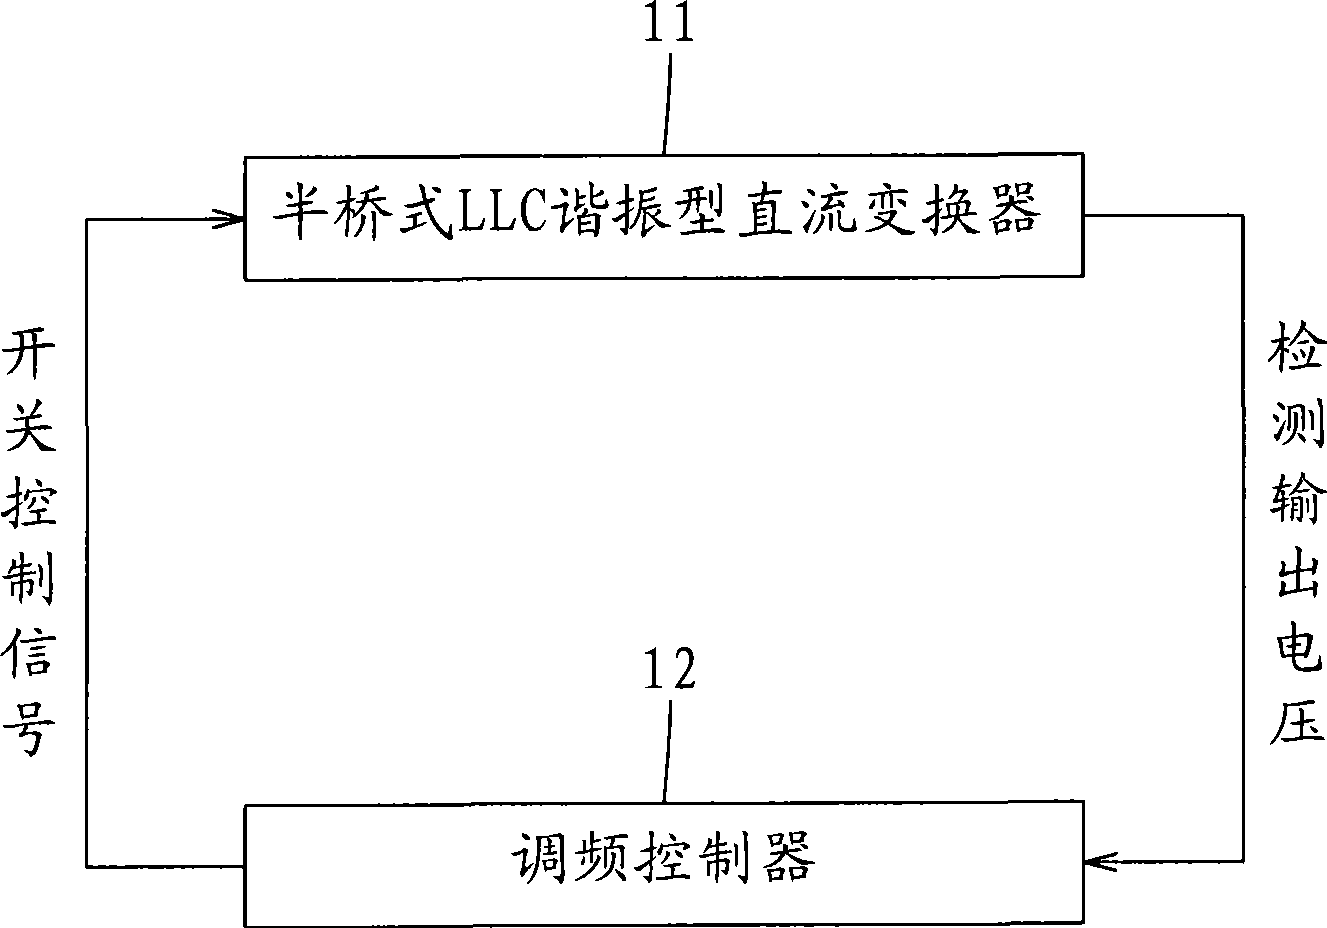 Controller applied for resonance type DC/DC converter